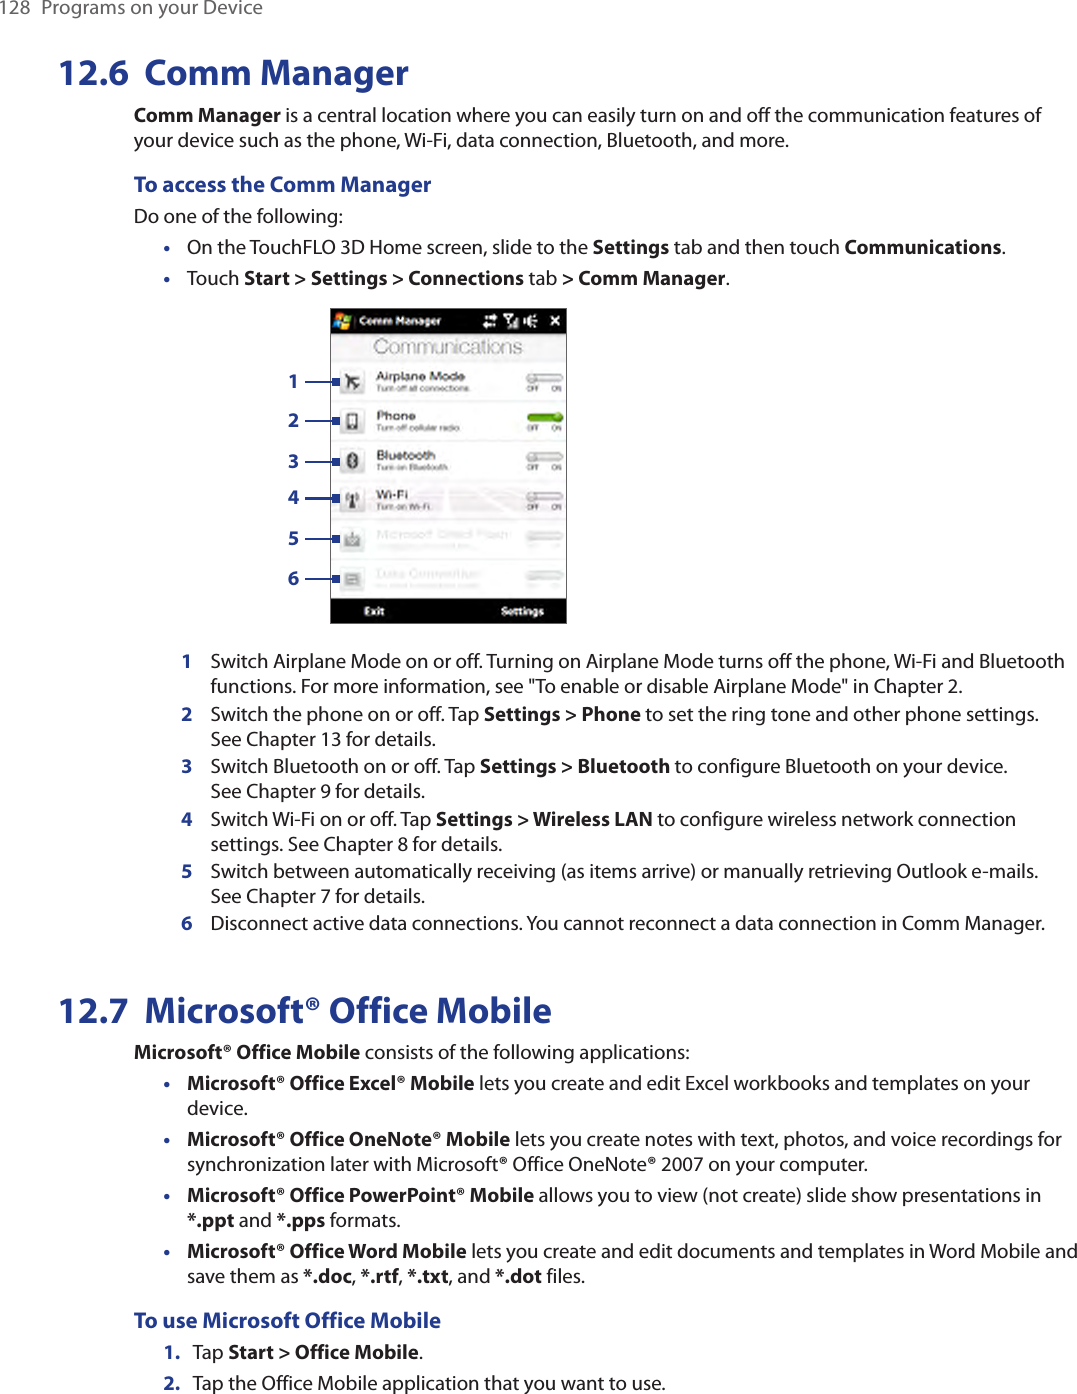 128  Programs on your Device12.6  Comm ManagerComm Manager is a central location where you can easily turn on and off the communication features of your device such as the phone, Wi-Fi, data connection, Bluetooth, and more.To access the Comm ManagerDo one of the following:On the TouchFLO 3D Home screen, slide to the Settings tab and then touch Communications.Touch Start &gt; Settings &gt; Connections tab &gt; Comm Manager.   1234561Switch Airplane Mode on or off. Turning on Airplane Mode turns off the phone, Wi-Fi and Bluetooth functions. For more information, see &quot;To enable or disable Airplane Mode&quot; in Chapter 2.2Switch the phone on or off. Tap Settings &gt; Phone to set the ring tone and other phone settings.  See Chapter 13 for details. 3Switch Bluetooth on or off. Tap Settings &gt; Bluetooth to configure Bluetooth on your device.  See Chapter 9 for details.4Switch Wi-Fi on or off. Tap Settings &gt; Wireless LAN to configure wireless network connection settings. See Chapter 8 for details.5Switch between automatically receiving (as items arrive) or manually retrieving Outlook e-mails.  See Chapter 7 for details.6Disconnect active data connections. You cannot reconnect a data connection in Comm Manager.12.7  Microsoft® Office MobileMicrosoft® Office Mobile consists of the following applications:Microsoft® Office Excel® Mobile lets you create and edit Excel workbooks and templates on your device.Microsoft® Office OneNote® Mobile lets you create notes with text, photos, and voice recordings for synchronization later with Microsoft® Office OneNote® 2007 on your computer.Microsoft® Office PowerPoint® Mobile allows you to view (not create) slide show presentations in *.ppt and *.pps formats.Microsoft® Office Word Mobile lets you create and edit documents and templates in Word Mobile and save them as *.doc, *.rtf, *.txt, and *.dot files.To use Microsoft Office Mobile1.  Tap Start &gt; Office Mobile.2.  Tap the Office Mobile application that you want to use.••••••